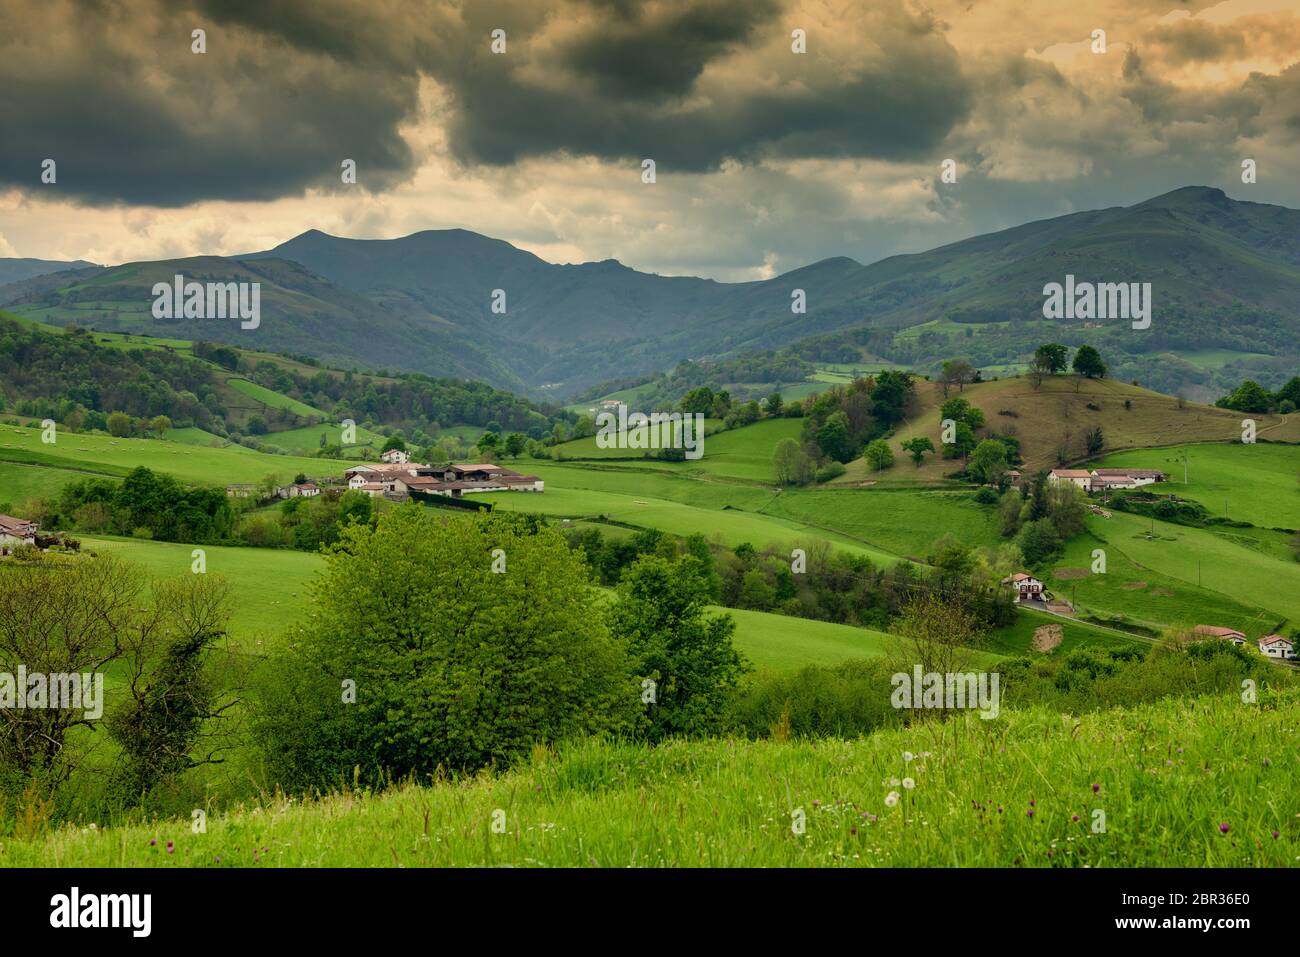 omfatte Slange mode landscape of Pays Basque, Green hills. French countryside in the Pyrenees  mountains in Basque Country, France Stock Photo - Alamy